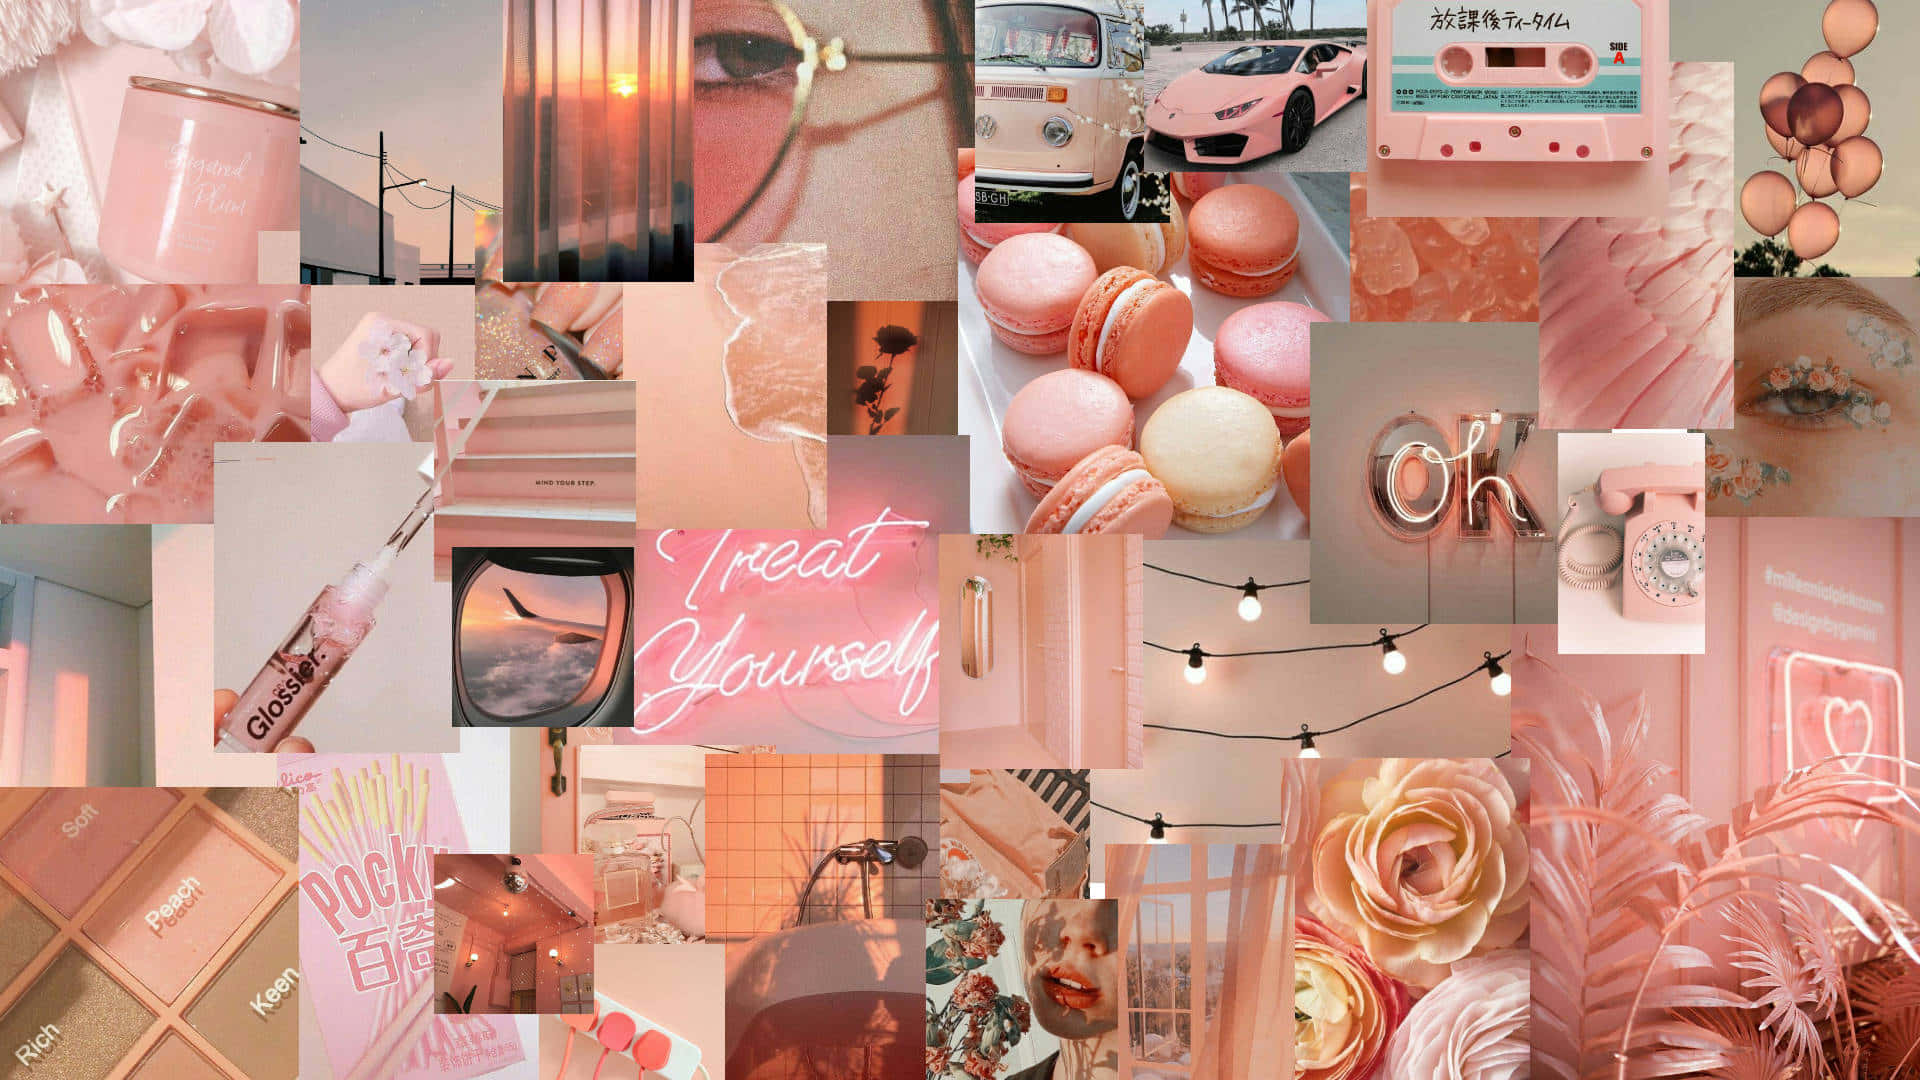 Peachy Pink Aesthetic Wall Collage Kit  60 Unique Poster Set  Free Tape   4x6in Each  Posters Dorm Bedroom Decor  Hostel Essential  Aesthetic  Room Decor  Soft  Long Lasting Colours 